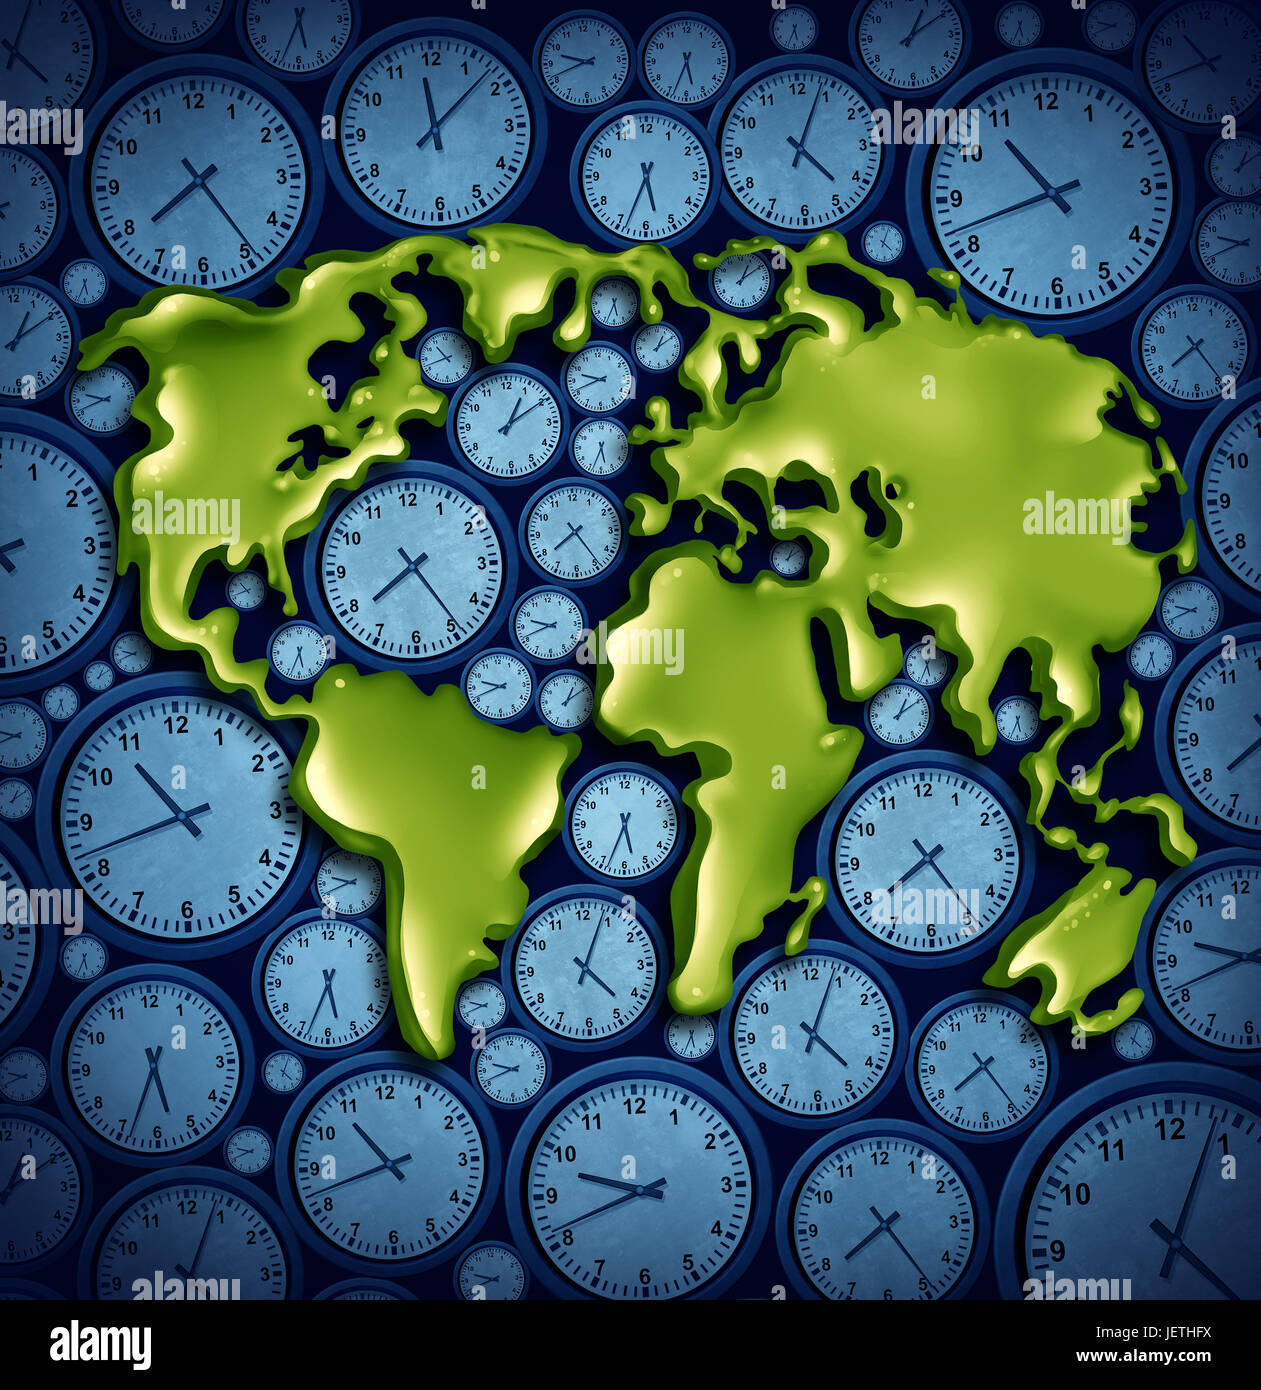 World time zones business travel concept as a planet on different clock icons as a symbol for international traveling with 3D illustration elements. Stock Photo